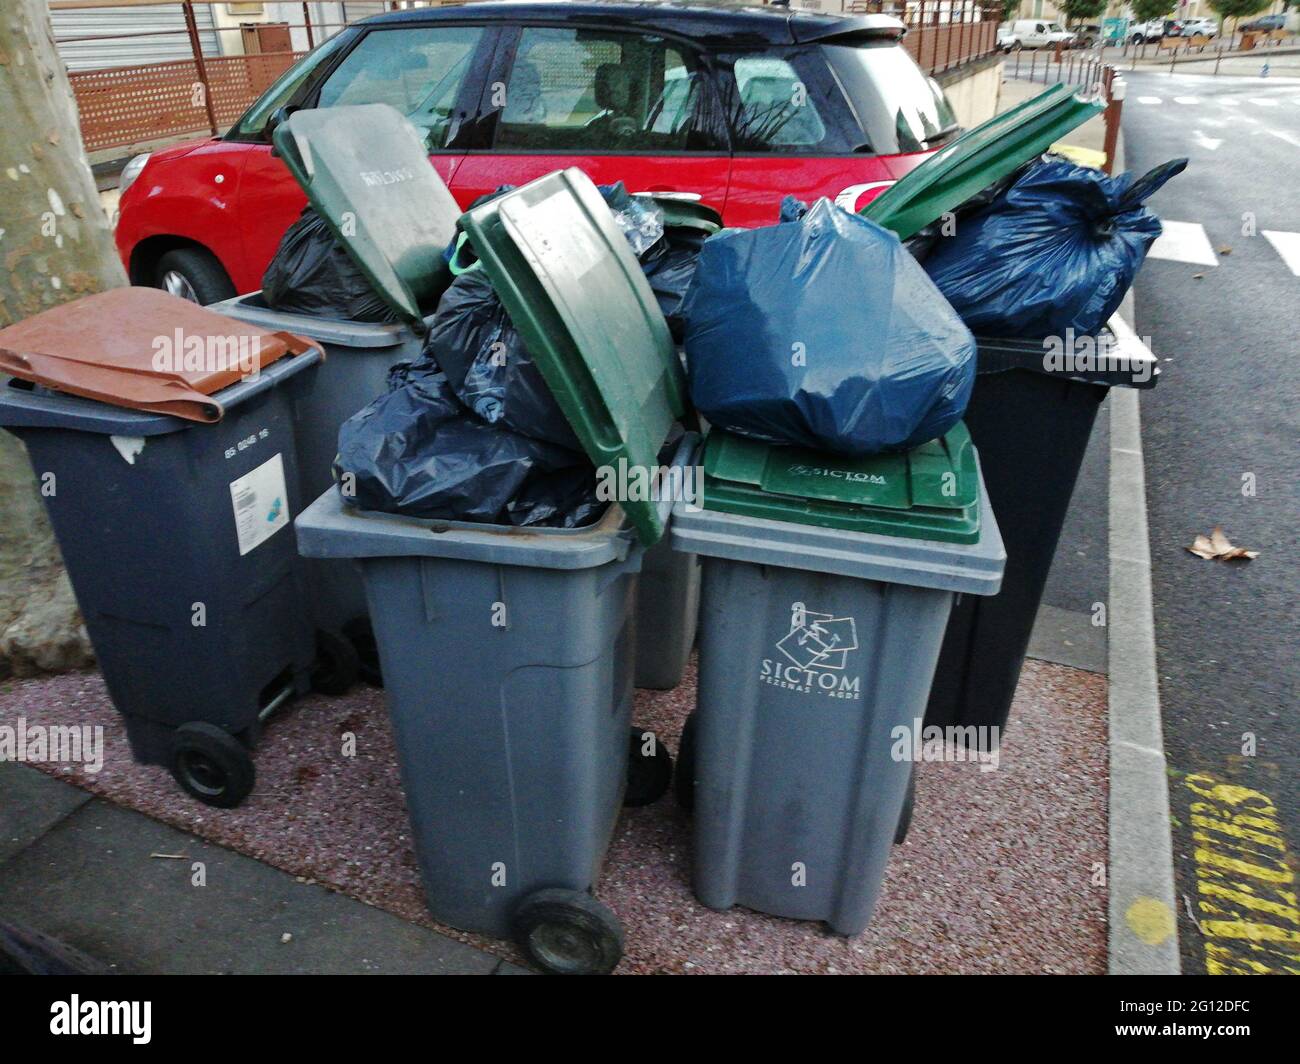 Garbage is piled up around plastic collection bins at a collection point. Stock Photo